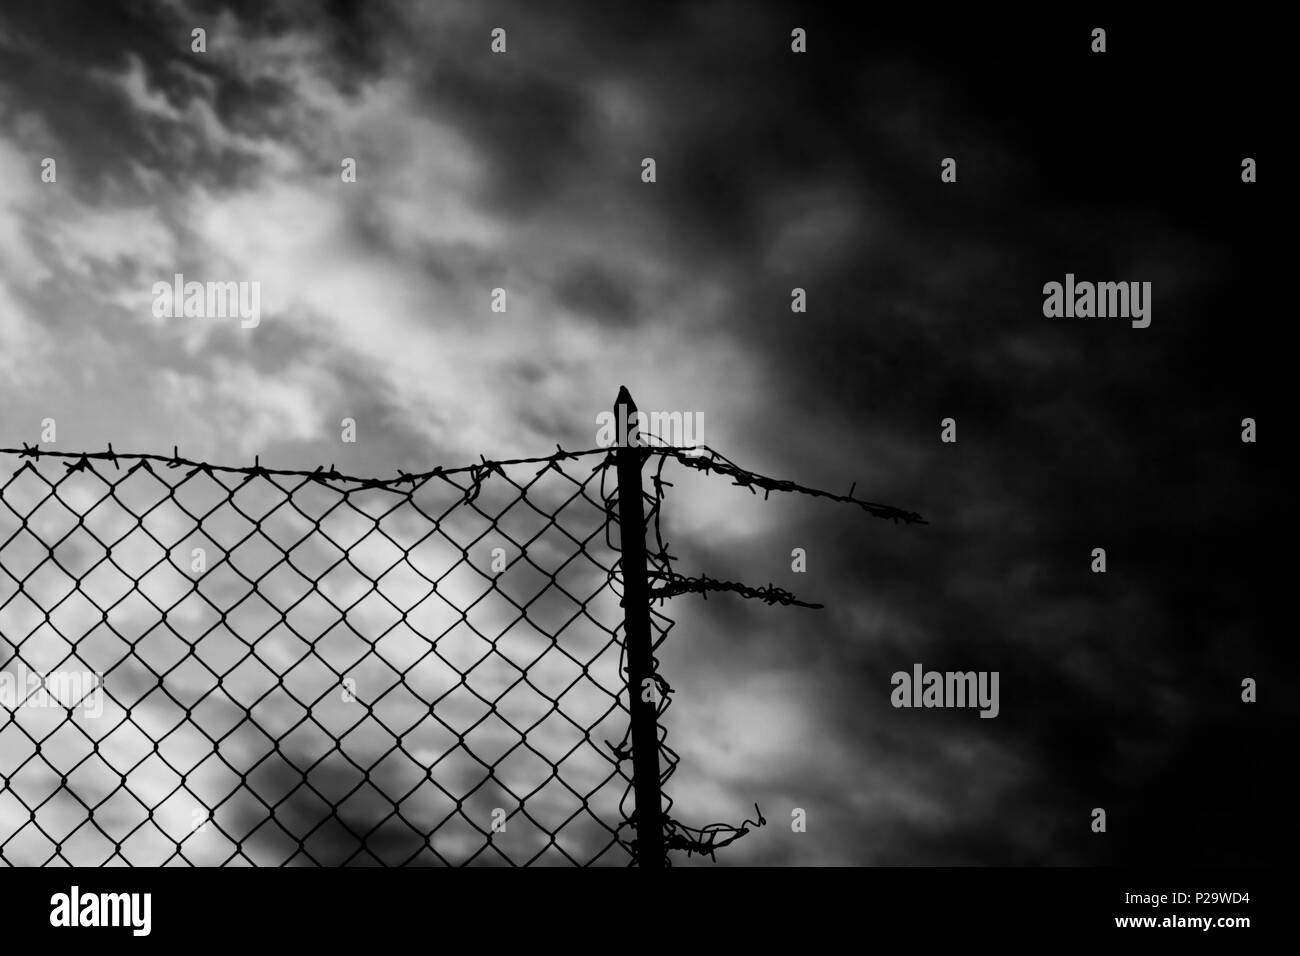 A broken fence over a dark sky. Barbed wire on top. Black-and-white shot. Symbolic shot: escapism, jail, hope, war. Stock Photo